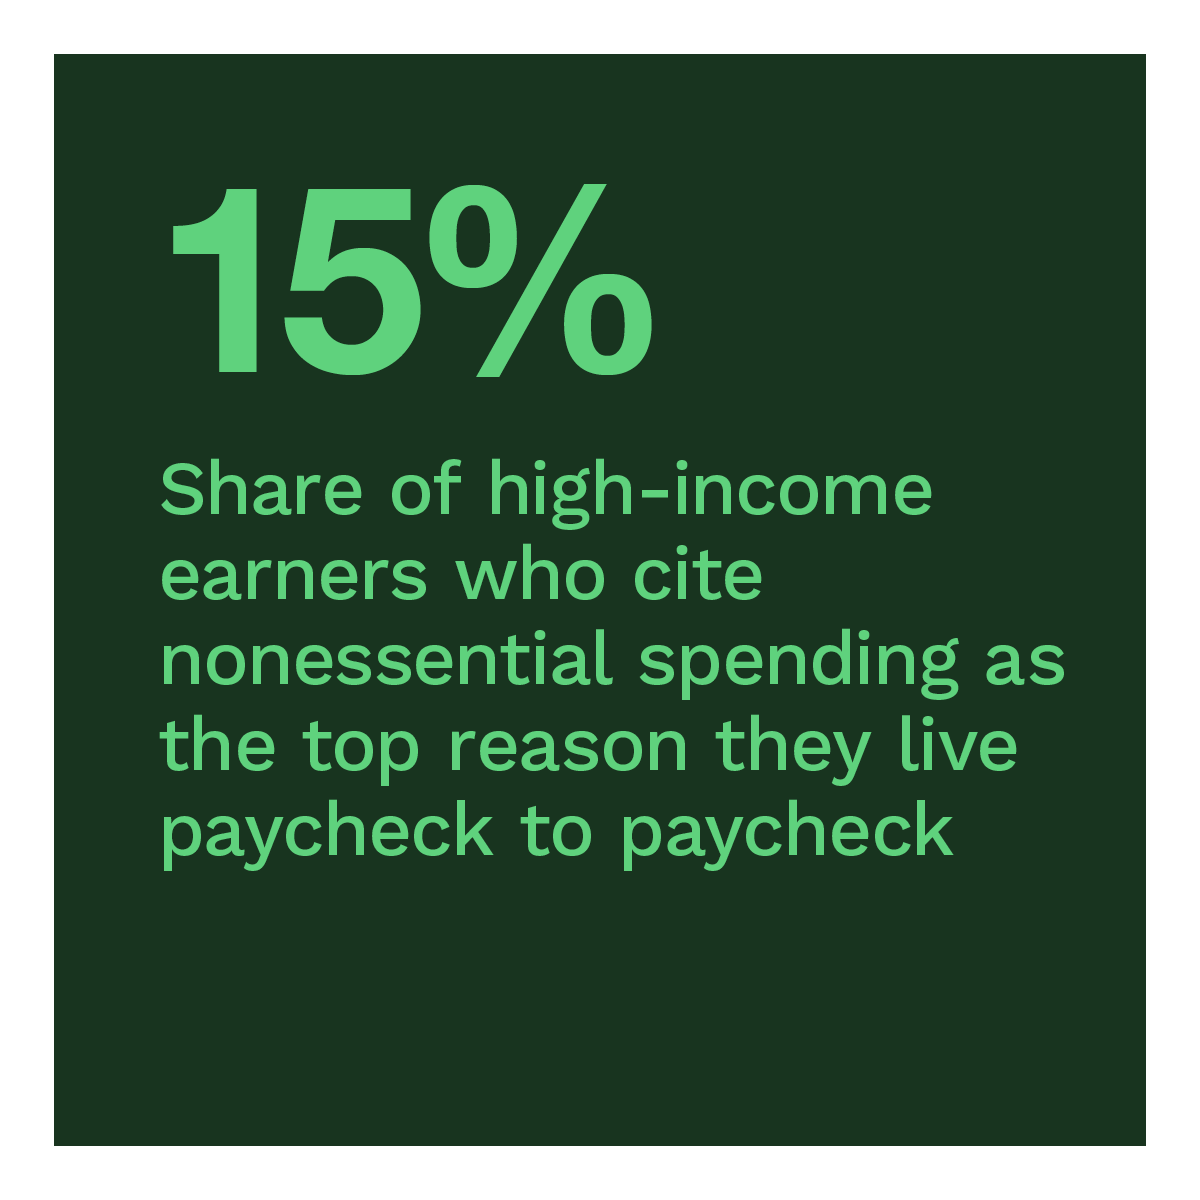 15%: Share of high-income earners who cite nonessential spending as the top reason they live paycheck to paycheck